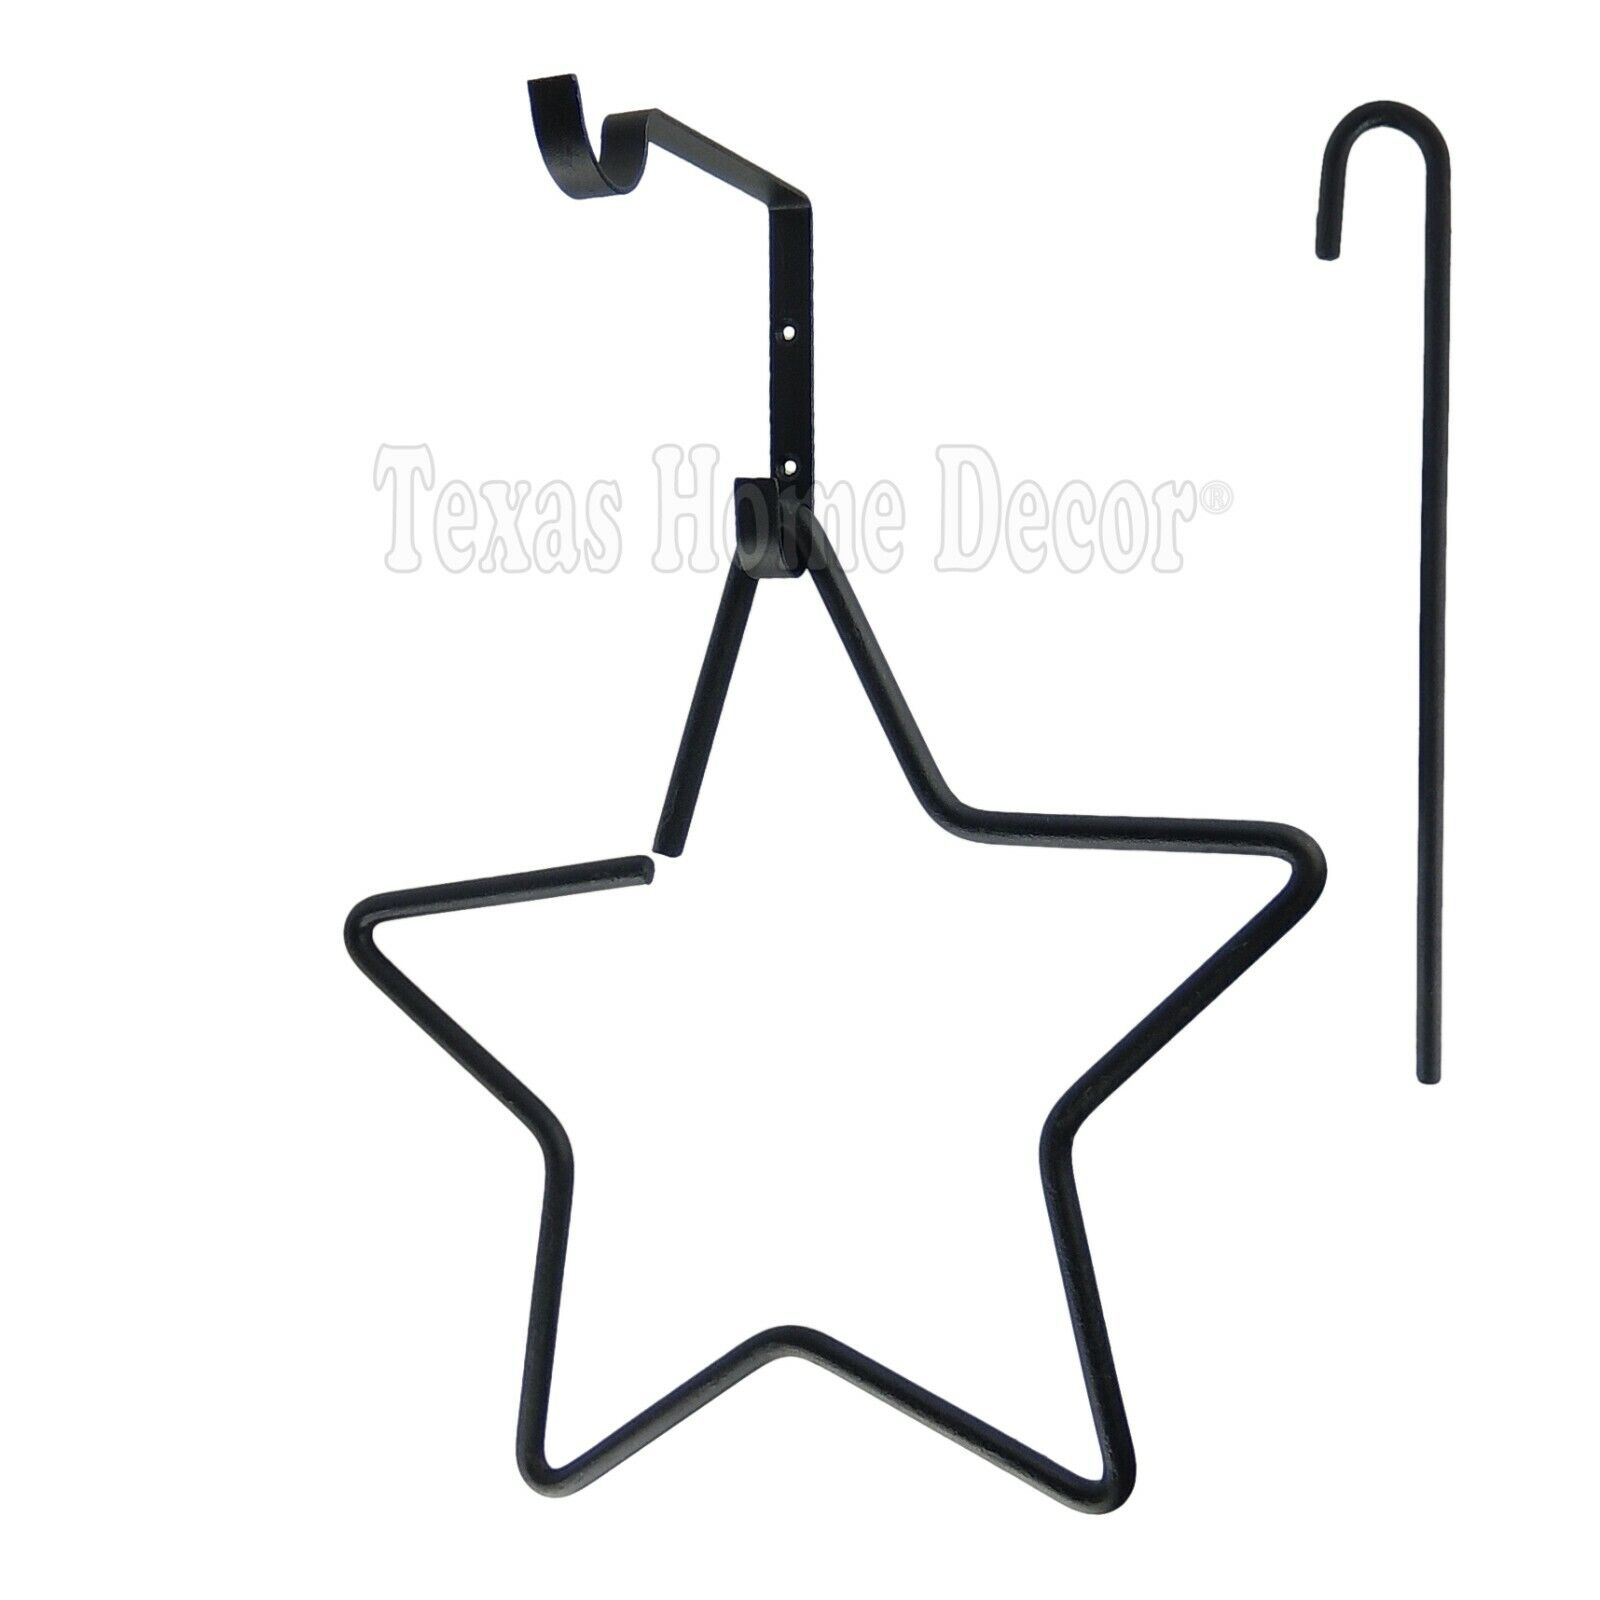 Star Dinner Bell with Clanger Wrought Iron Bracket Mount Country Western Black 